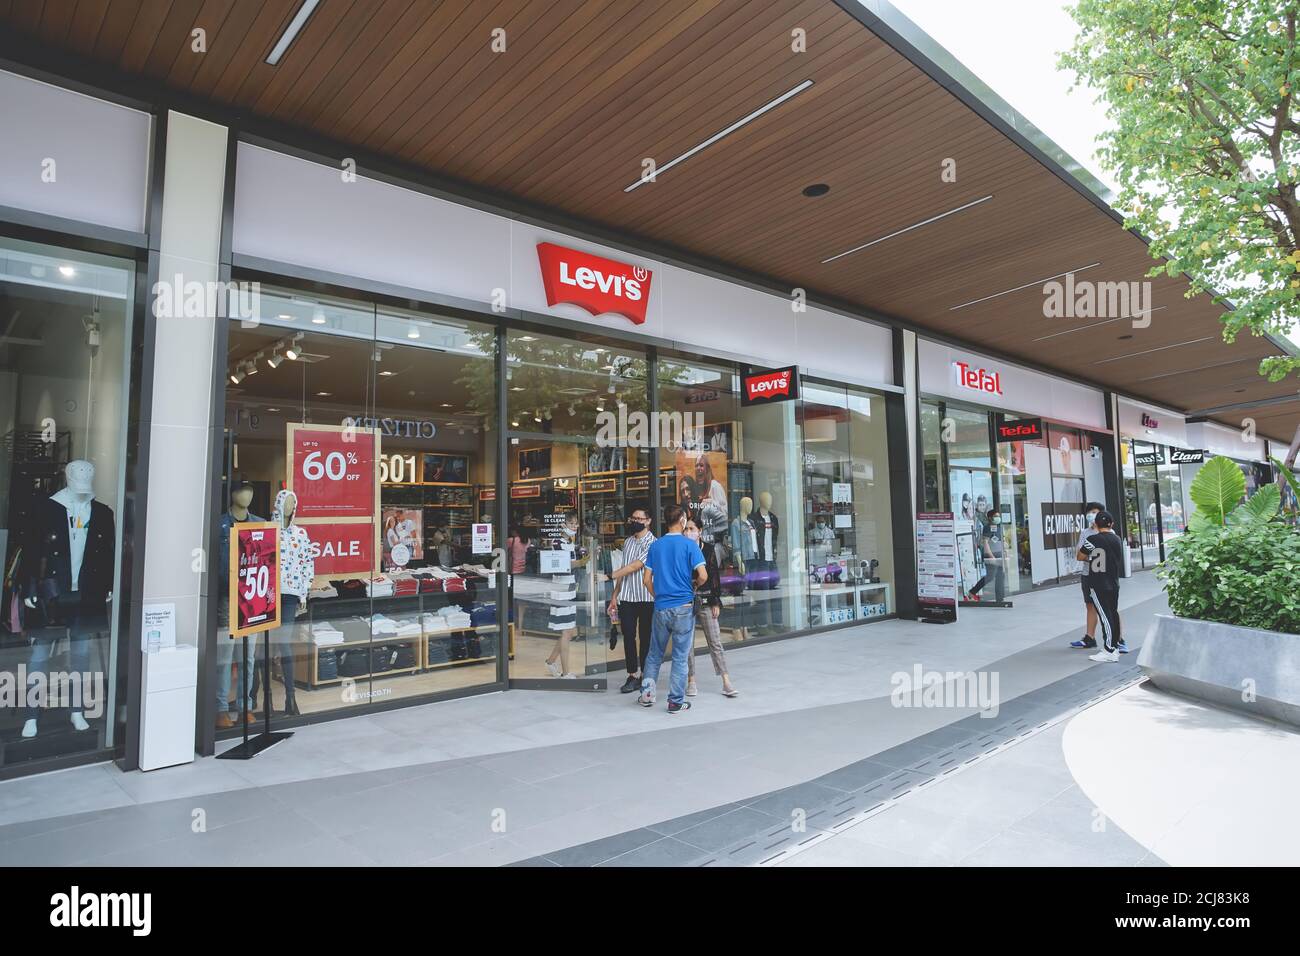 Samut Prakan, Thailand - July 28, 2020: Levi's shop in Siam Premium Outlets Bangkok. Levi Strauss & Co is an American fashion brand known for denim je Stock Photo